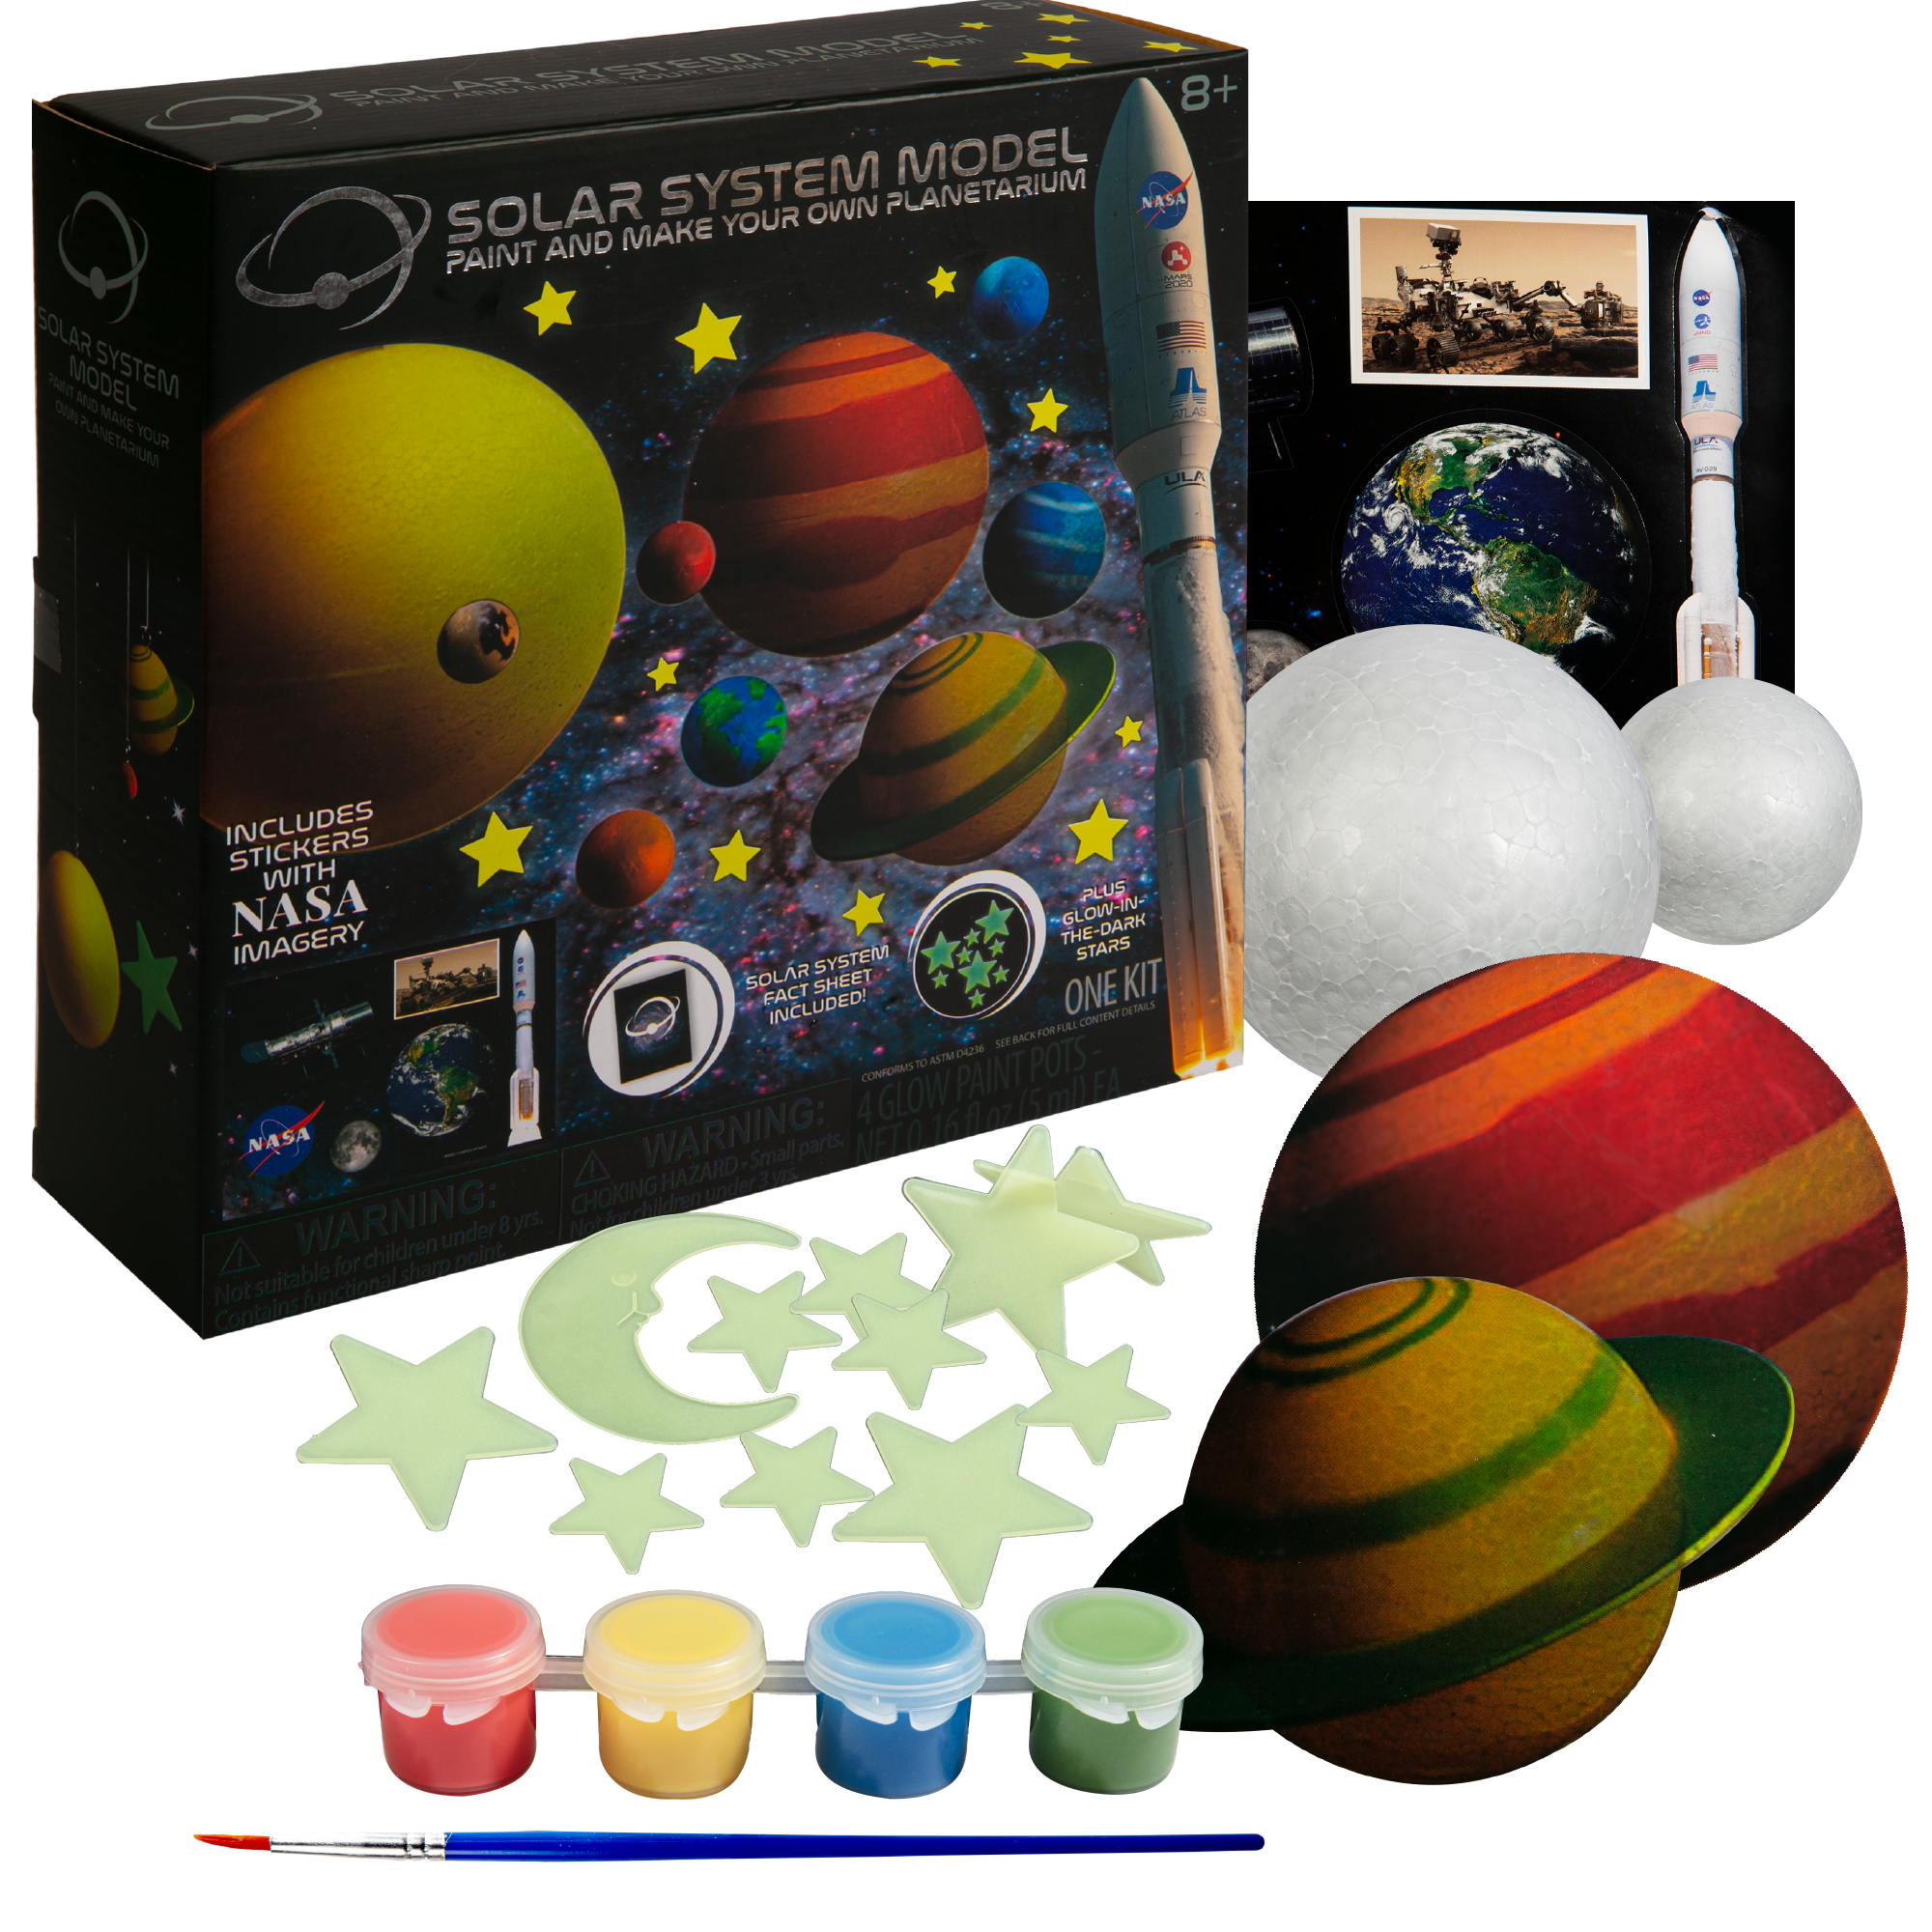 Image of NASA Paint and Make Your Own Solar System Model